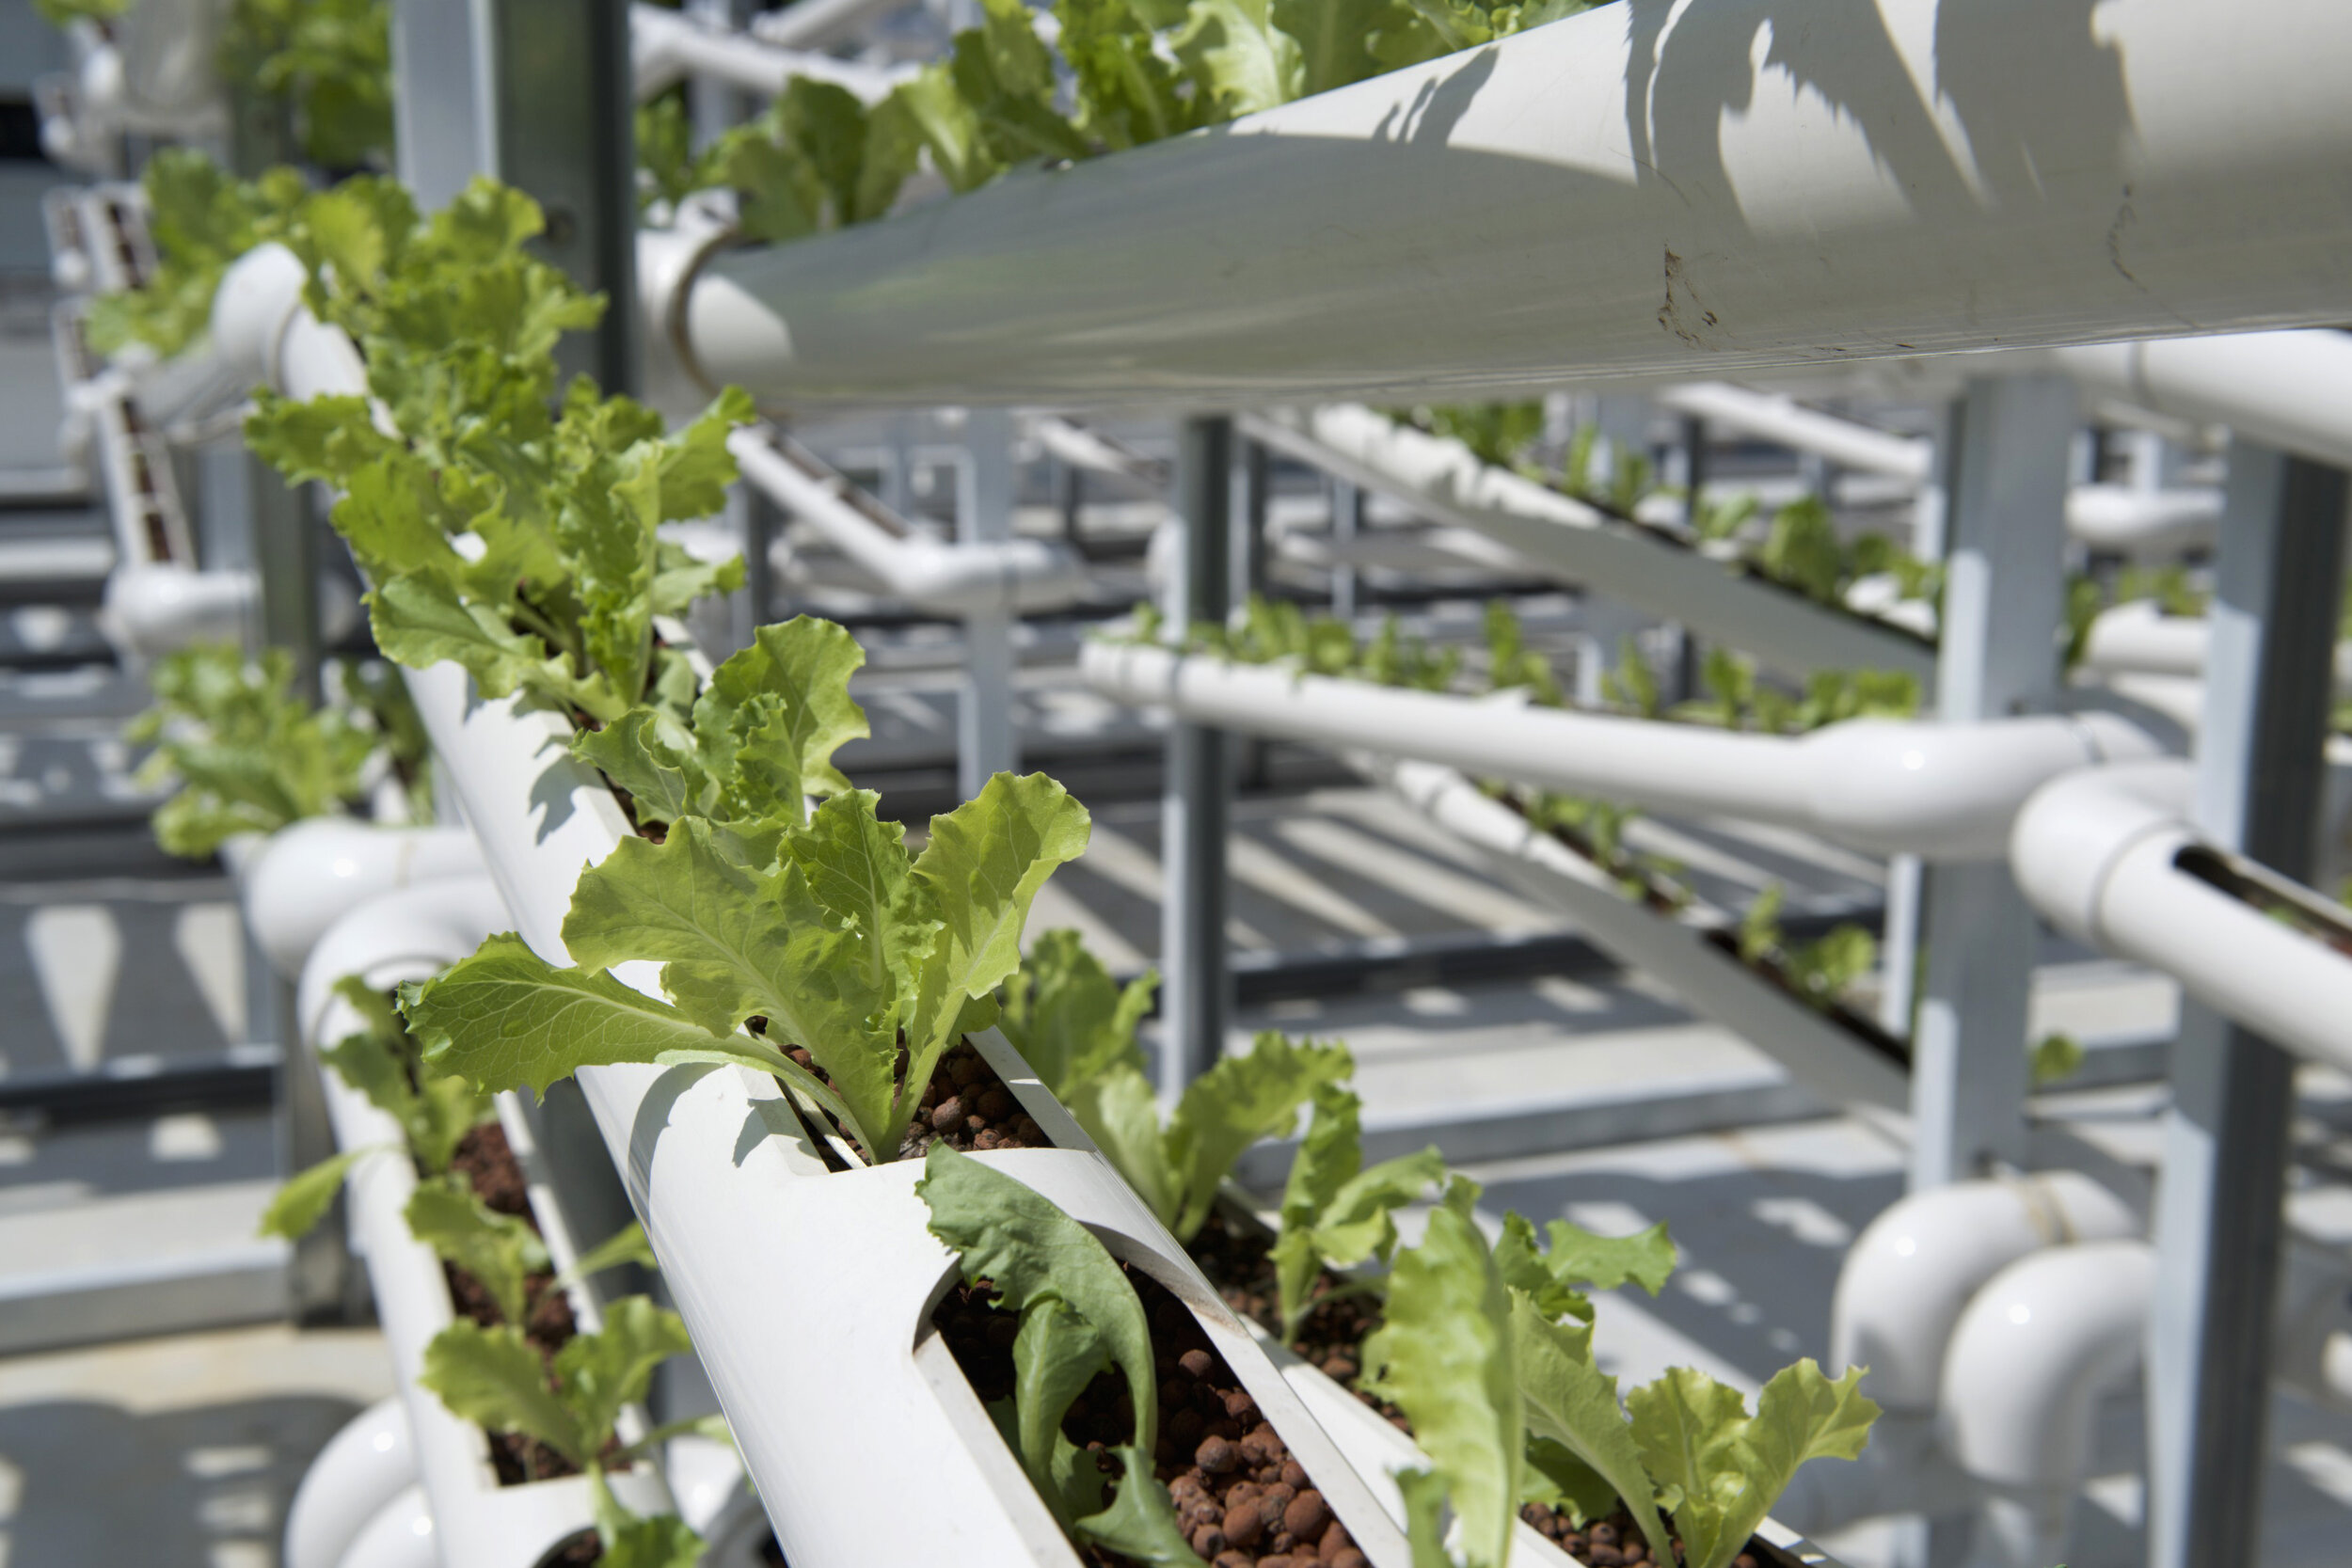  Organic lettuces are seen on rows of growing towers that are primarily made out of polyvinyl chloride (PVC) pipes at Citiponics' urban farm on the rooftop of a multi-storey carpark in a public housing estate in western Singapore 